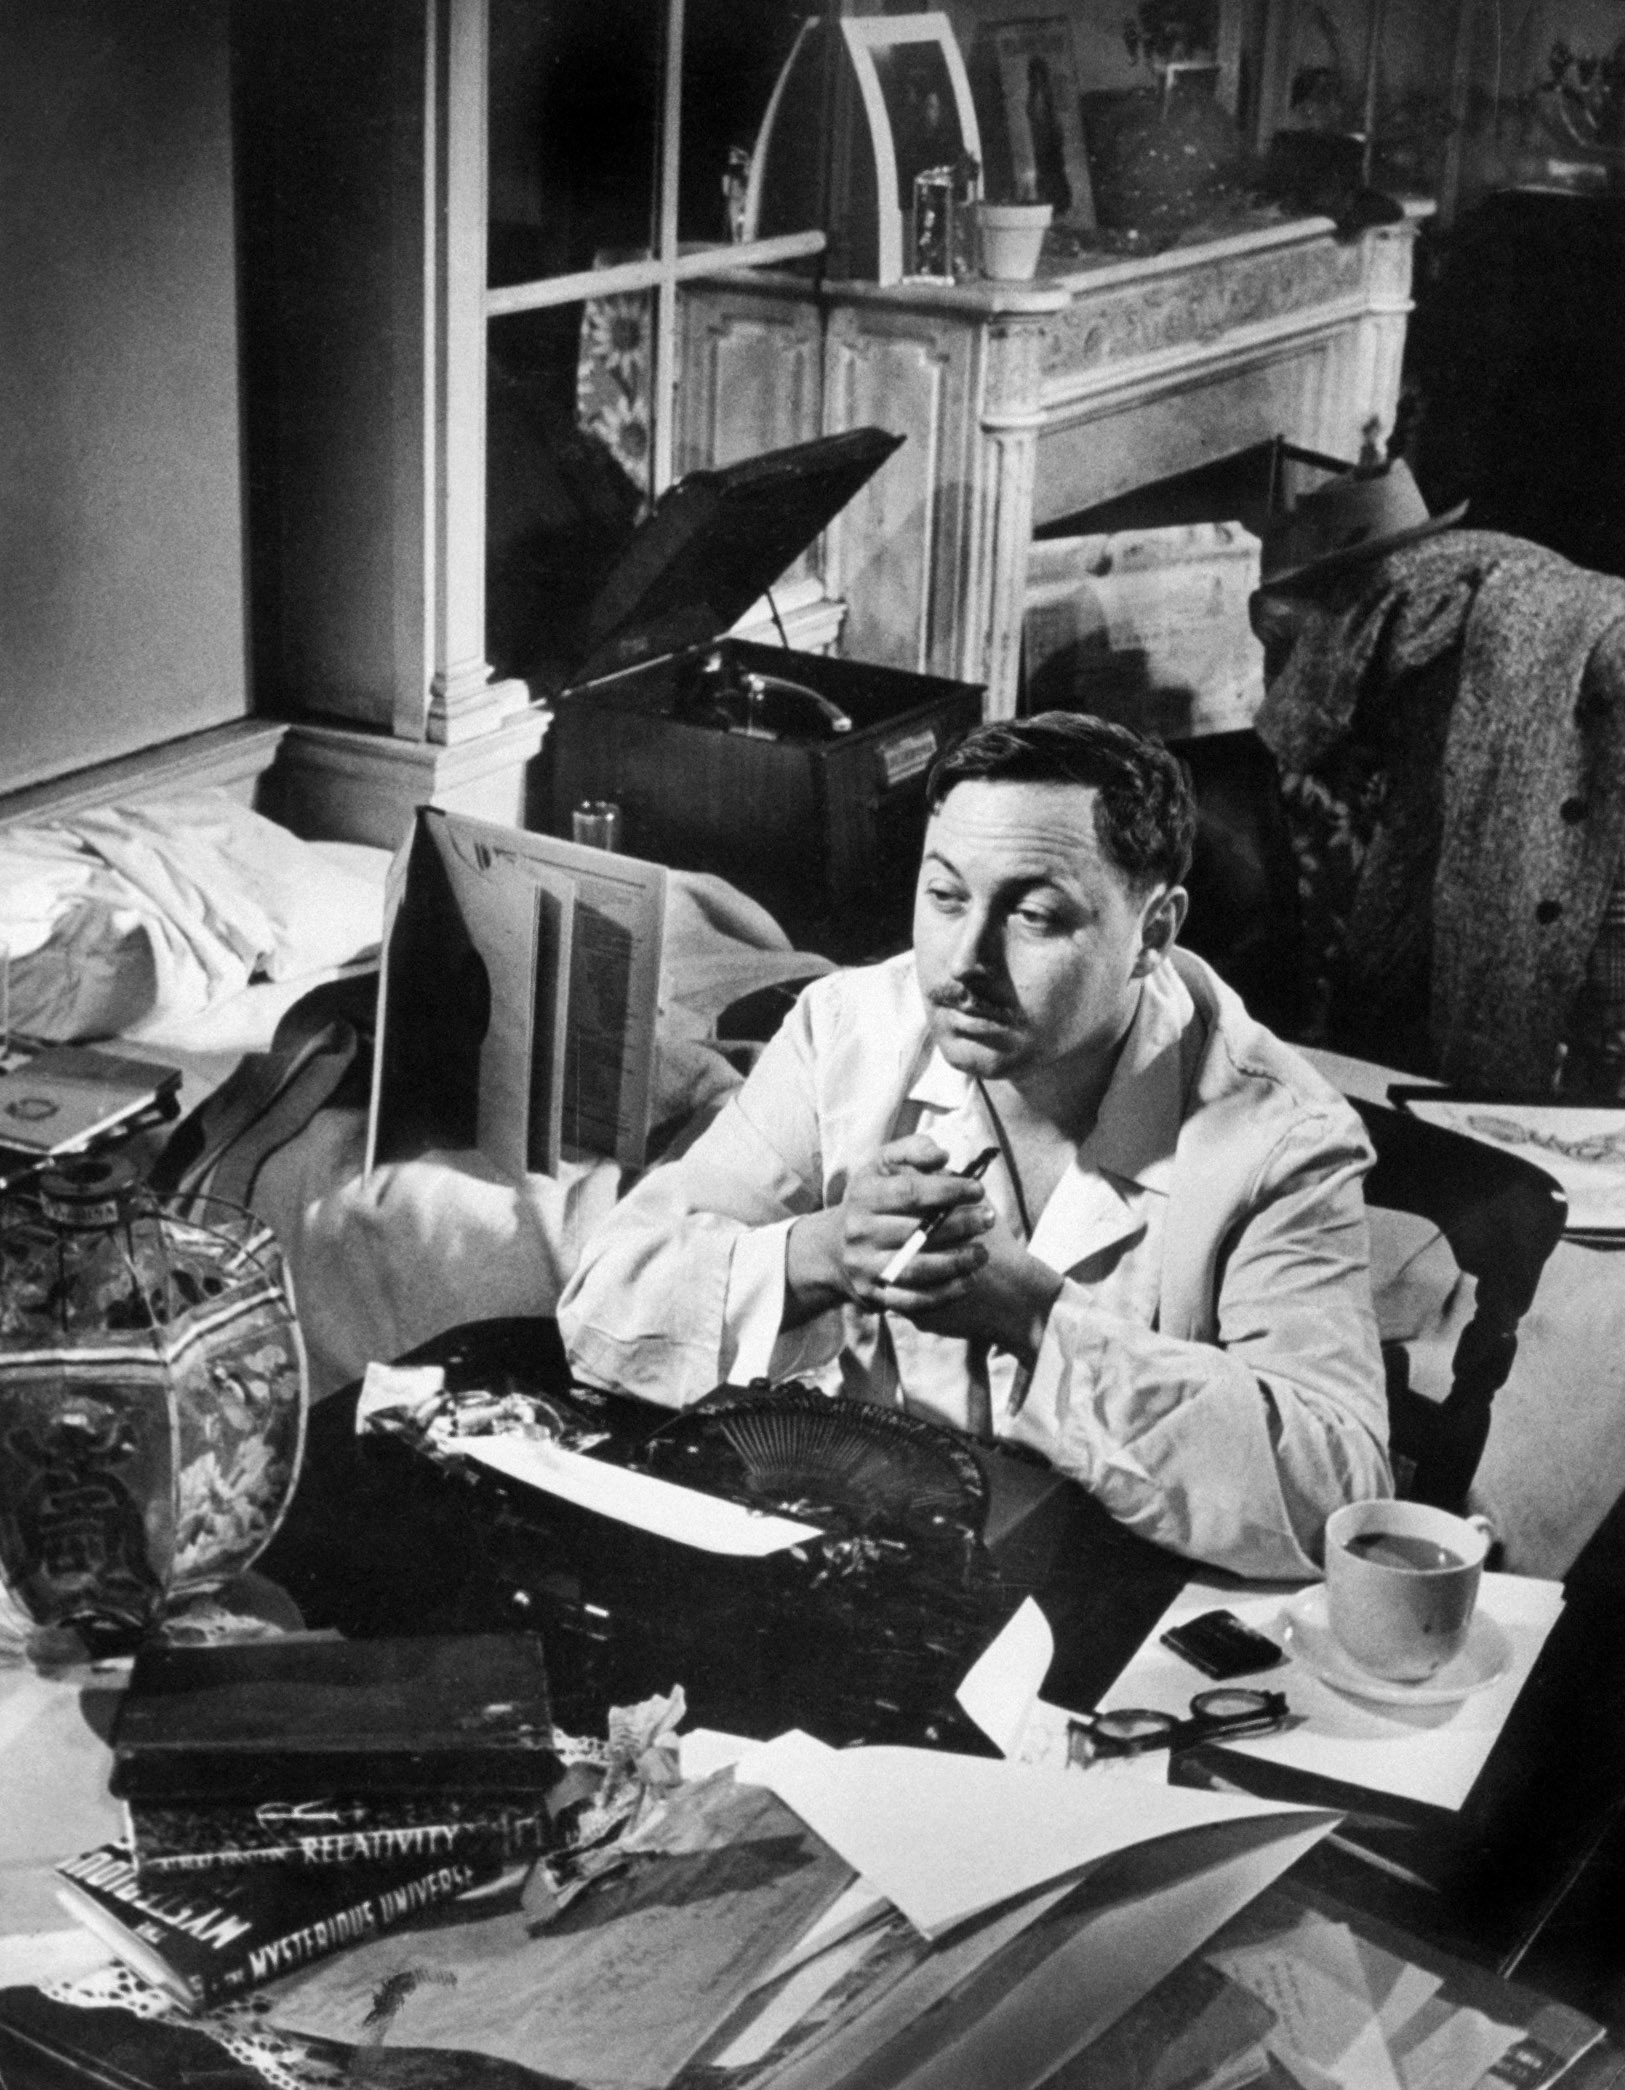 Tennessee Williams at his typewriter in New York in 1948.